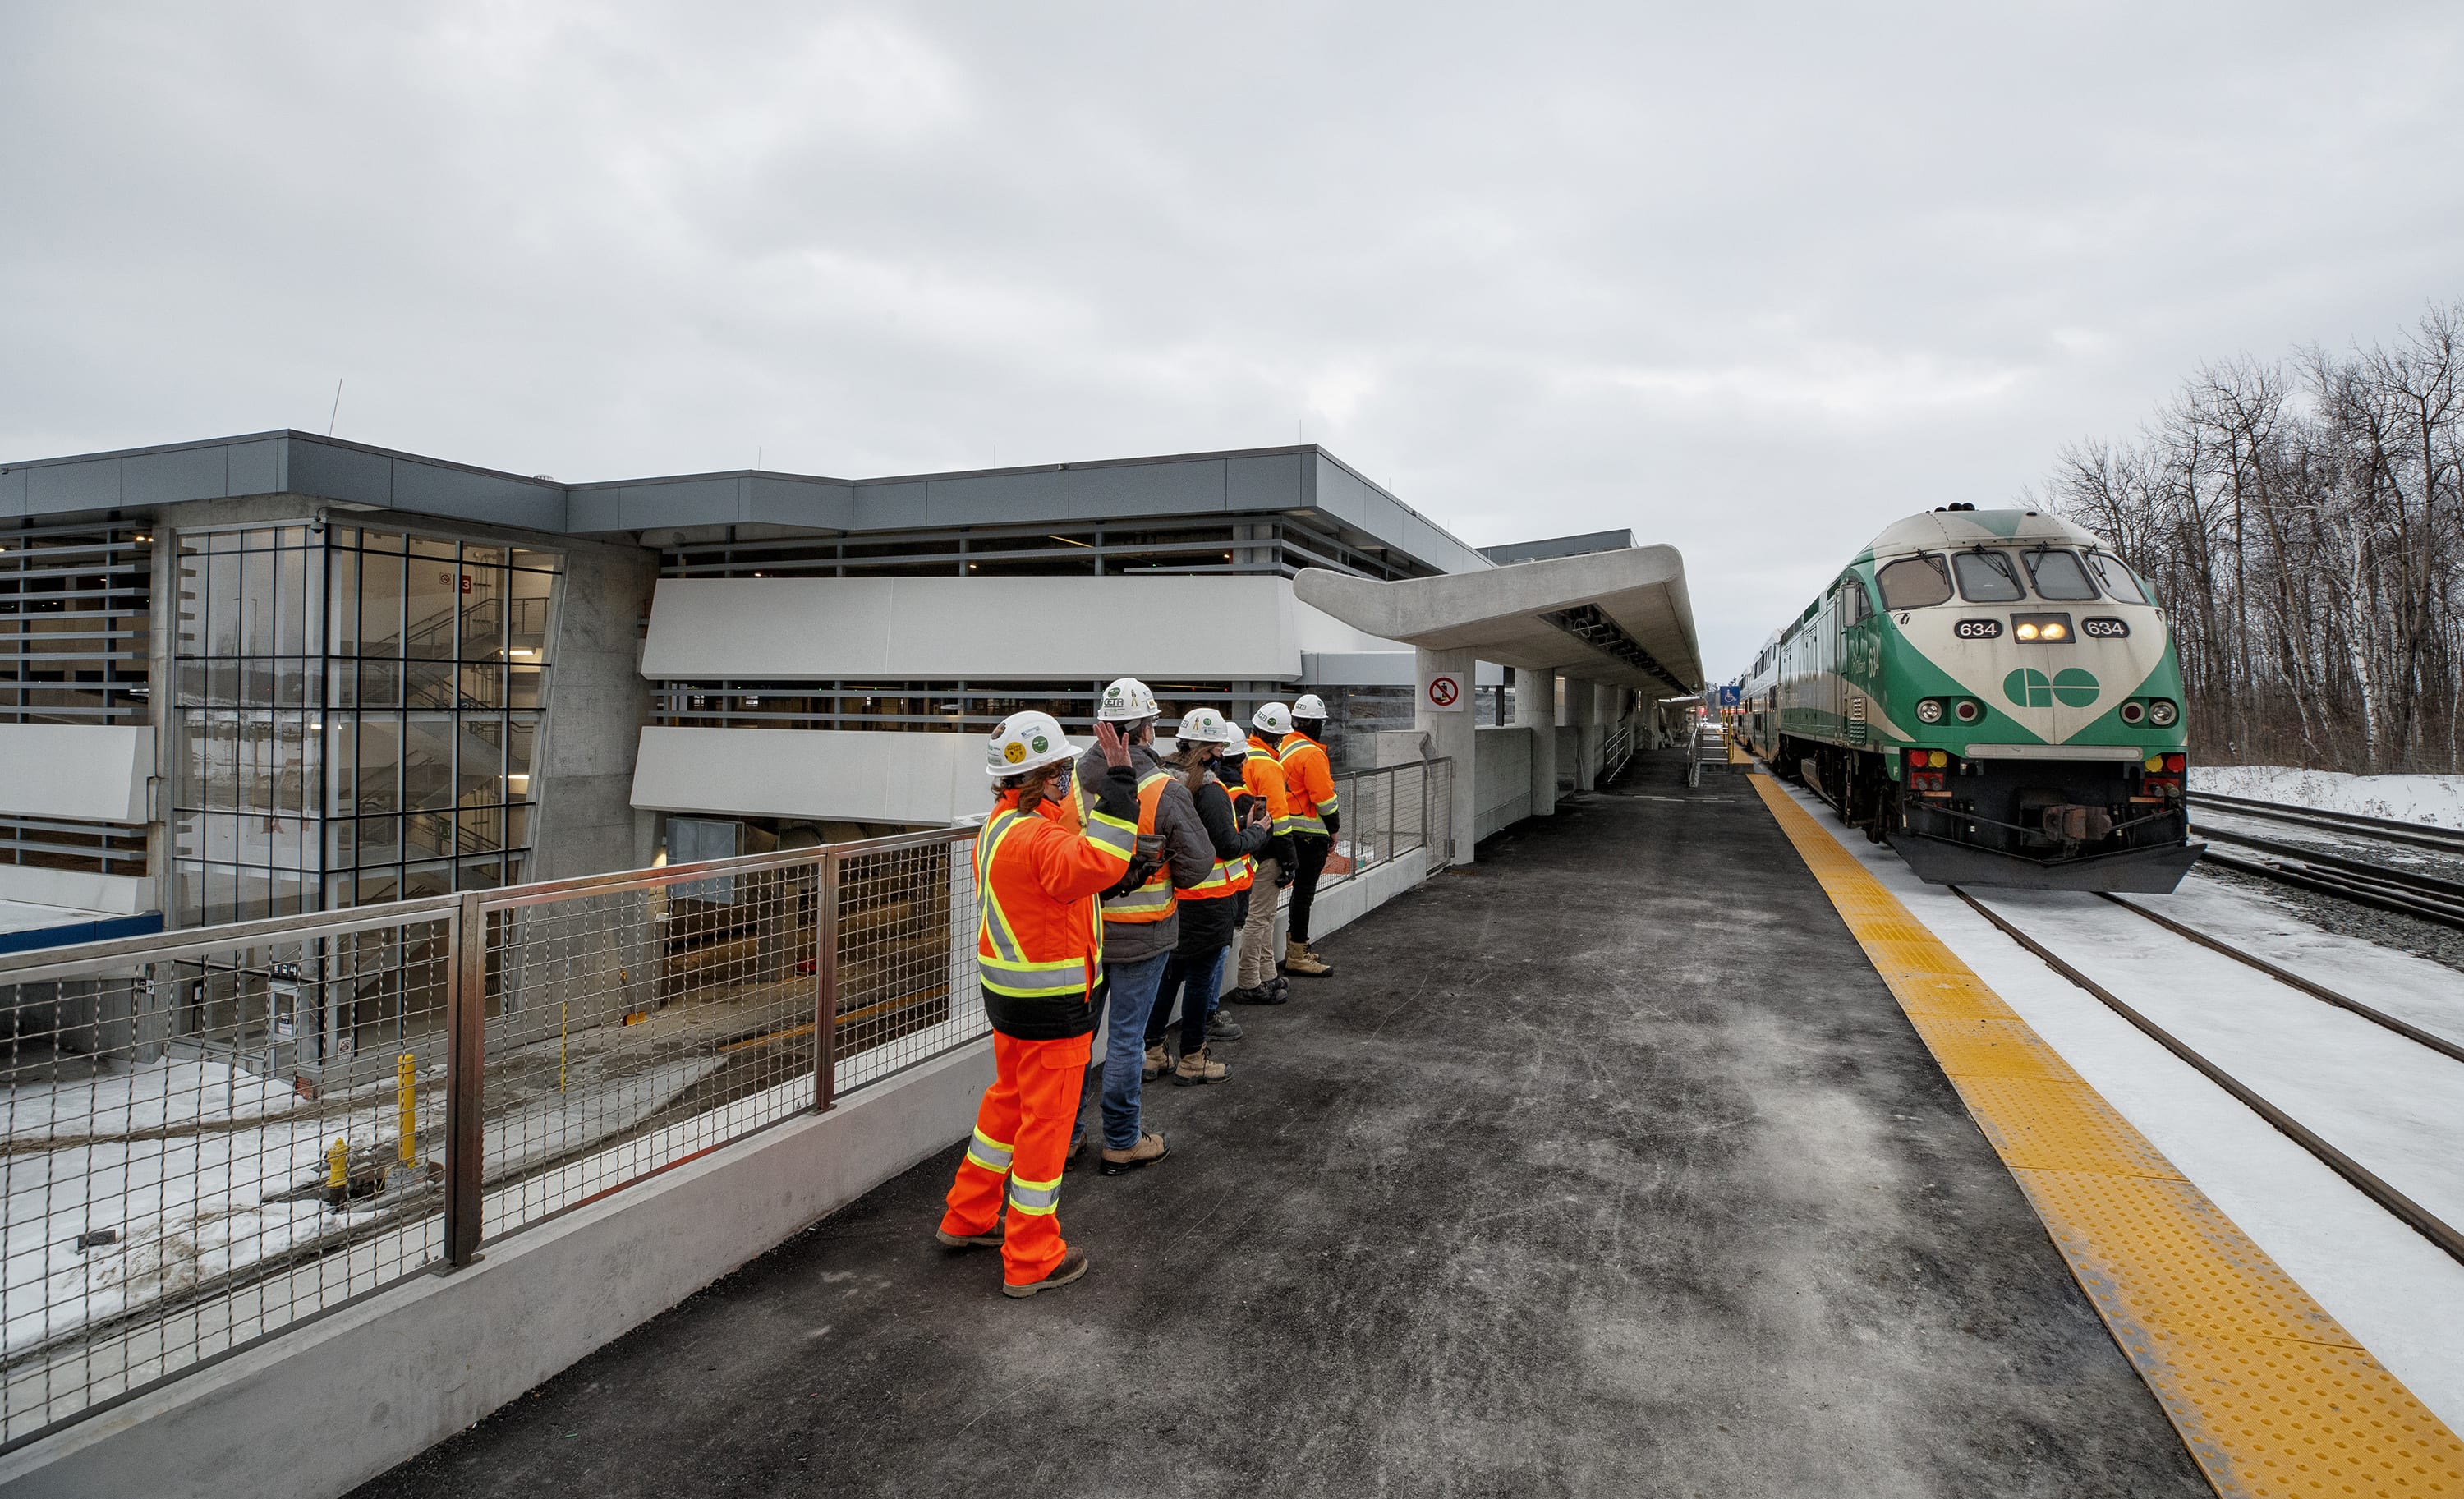 A GO train pulls slowly in as staff stand on the platform.